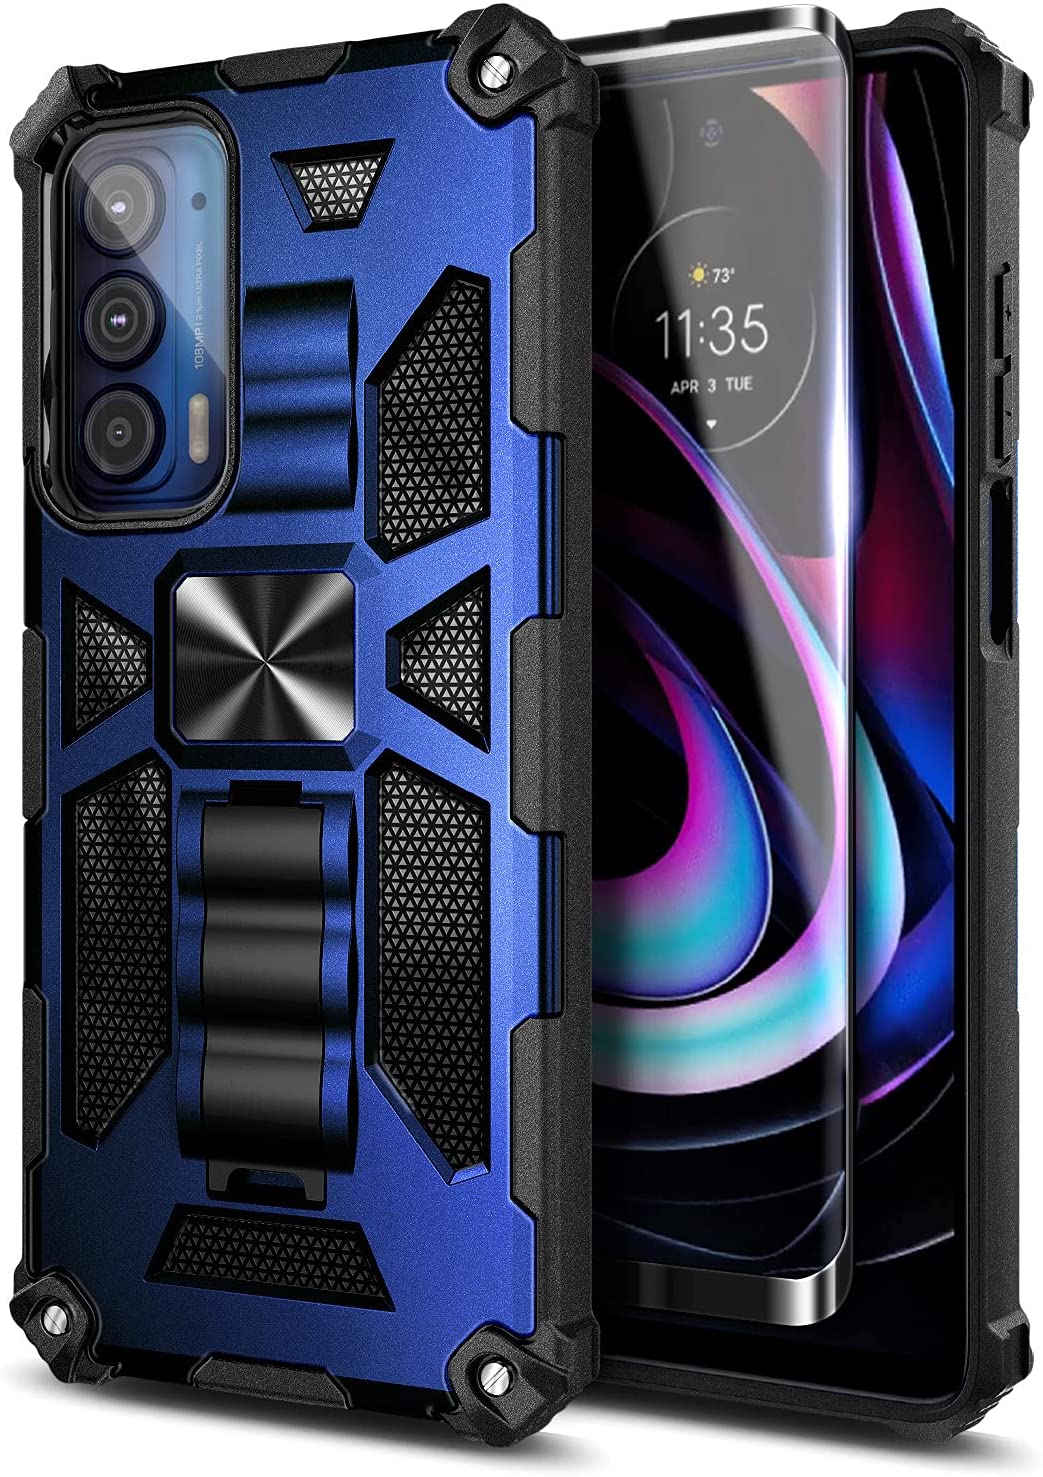 Nagebee Case for Motorola Moto Edge 5G UW, Moto Edge 2021 with Tempered Glass Screen Protector (Full Coverage), Full-Body Protective Shockproof [Military-Grade], Built in Kickstand Case (Blue) - image 1 of 5